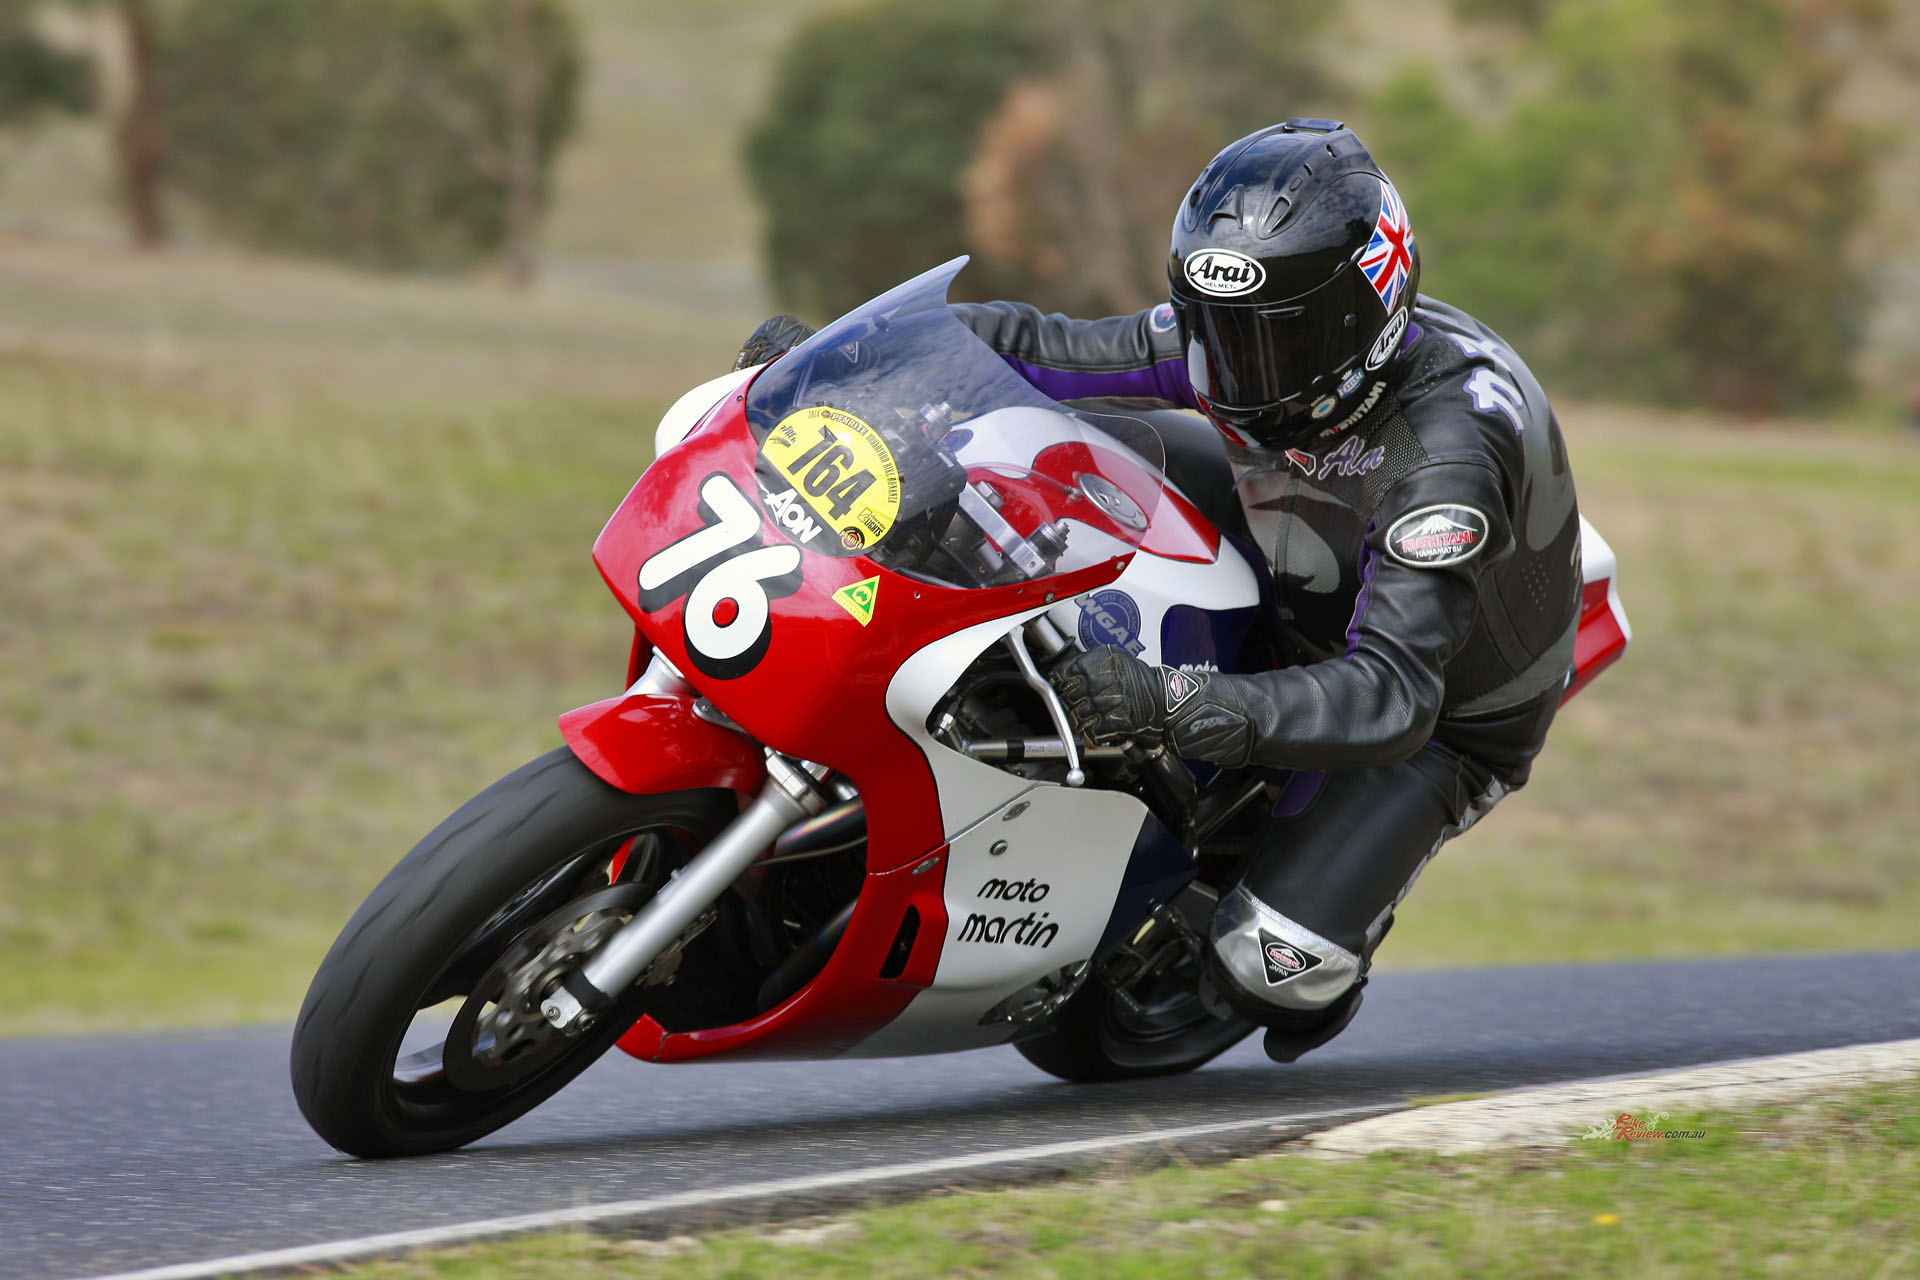 The French hearted and Japanese boned Moto Martin Suzuki GSX1100 has found it's home down-under racing in the heavily competitive Post-Classic Unlimited Period 5 class. Cathcart took it for a spin...